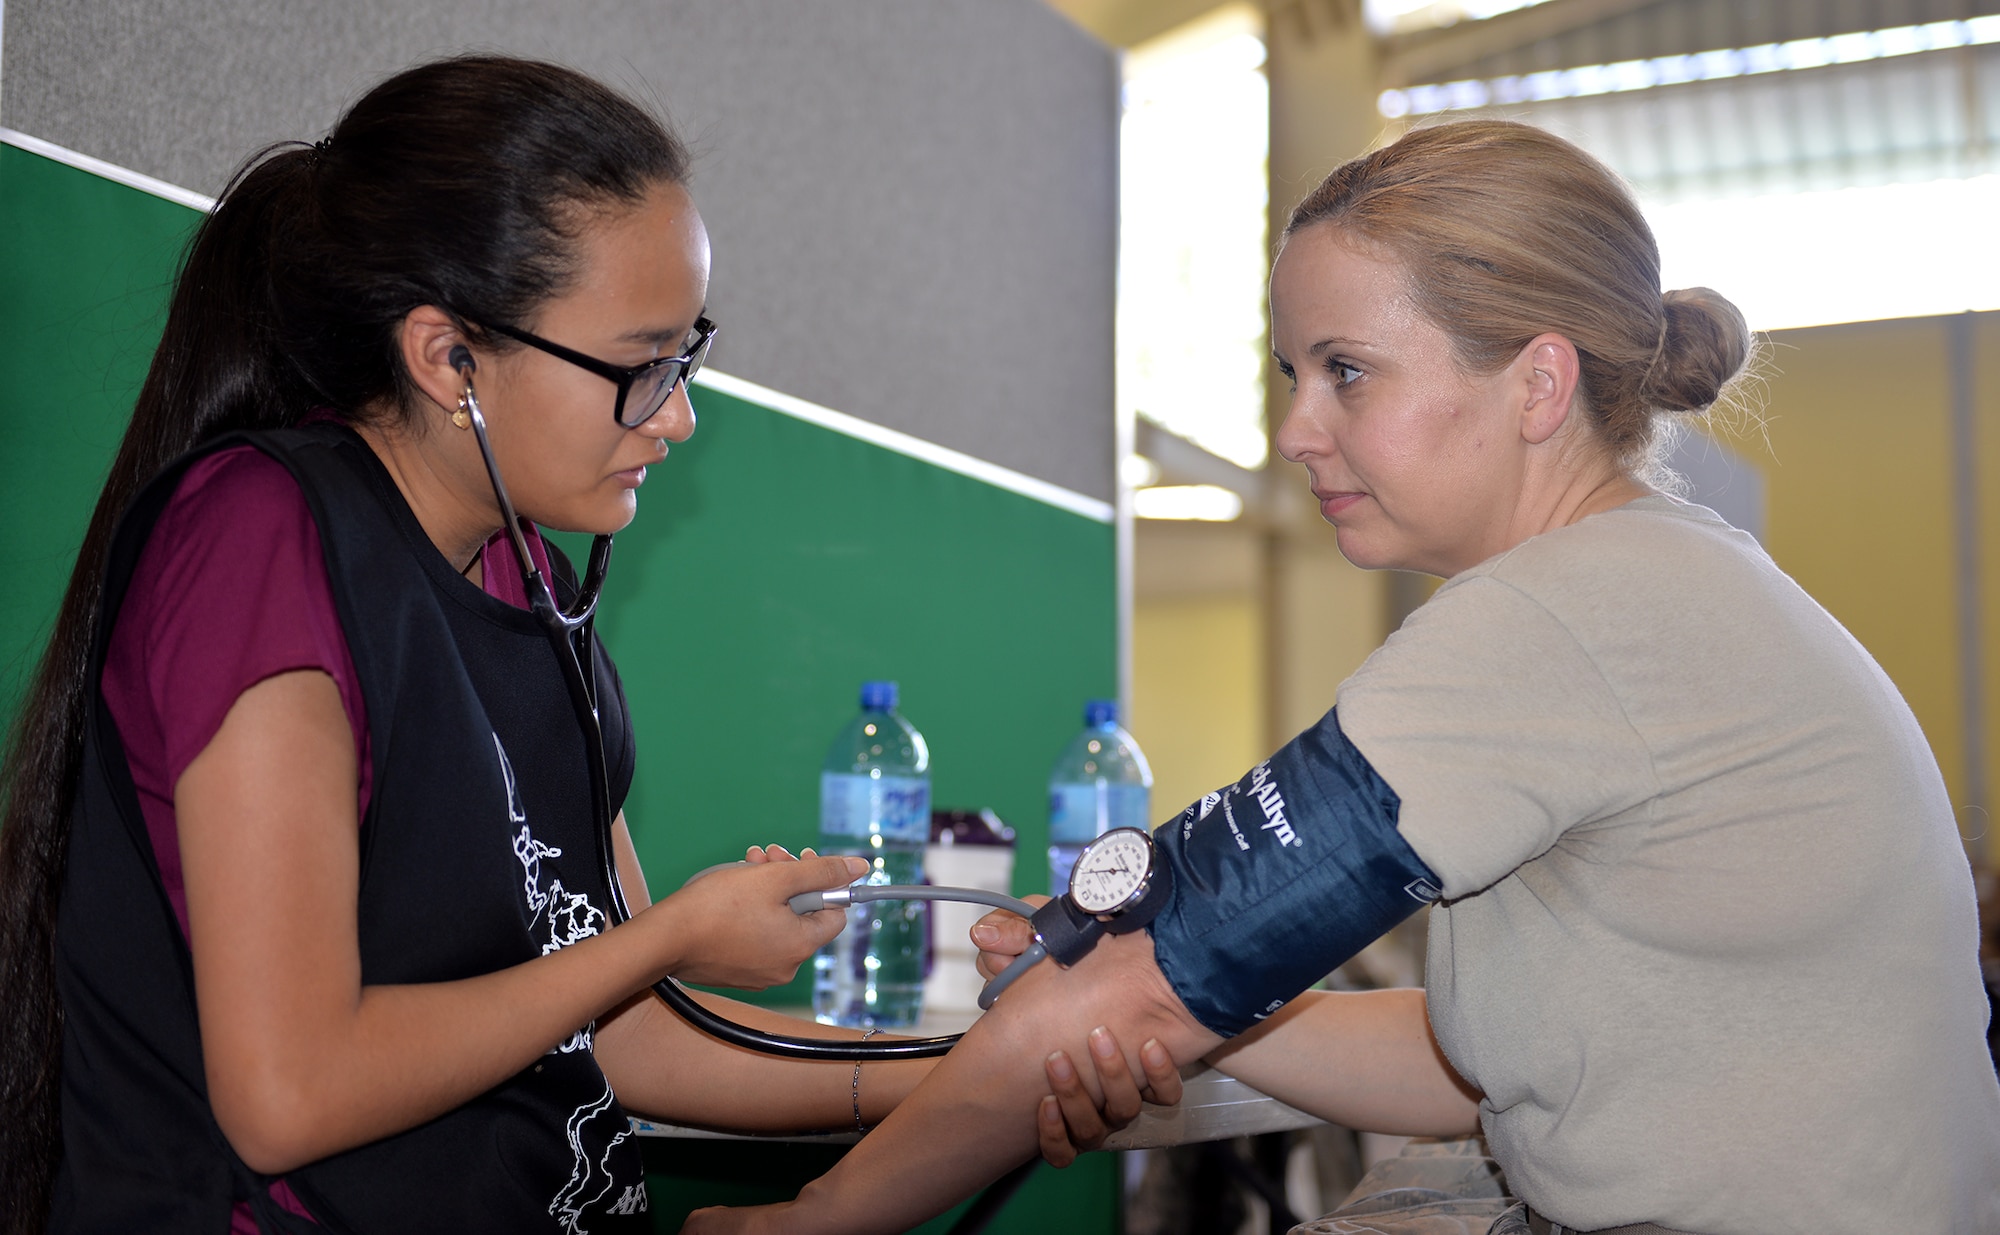 U.S. Air Force Capt. Natasha Lewis, a nurse with the 21st Medical Operations Squadron out of Peterson Air Force Base, Colo., has a local medical student volunteer take her blood pressure during a break between seeing patients in Azua, Dominican Republic, March 14, 2017, during a medical readiness training exercise as part of NEW HORIZONS 2017. Non-governmental organization (NGO)/private voluntary organization and private sector participation in NEW HORIZONS, coordinated with 12 Air Force, U.S. Southern Command, the Department of State, and the U.S. agency for International Development, nurtures partnerships between the military services, governmental, NGOs, and host-nation teams to ensure partnerships are in place in the event of a regional contingency requiring cooperative solutions. (U.S. Air Force photo by Master Sgt. Karen J. Tomasik)